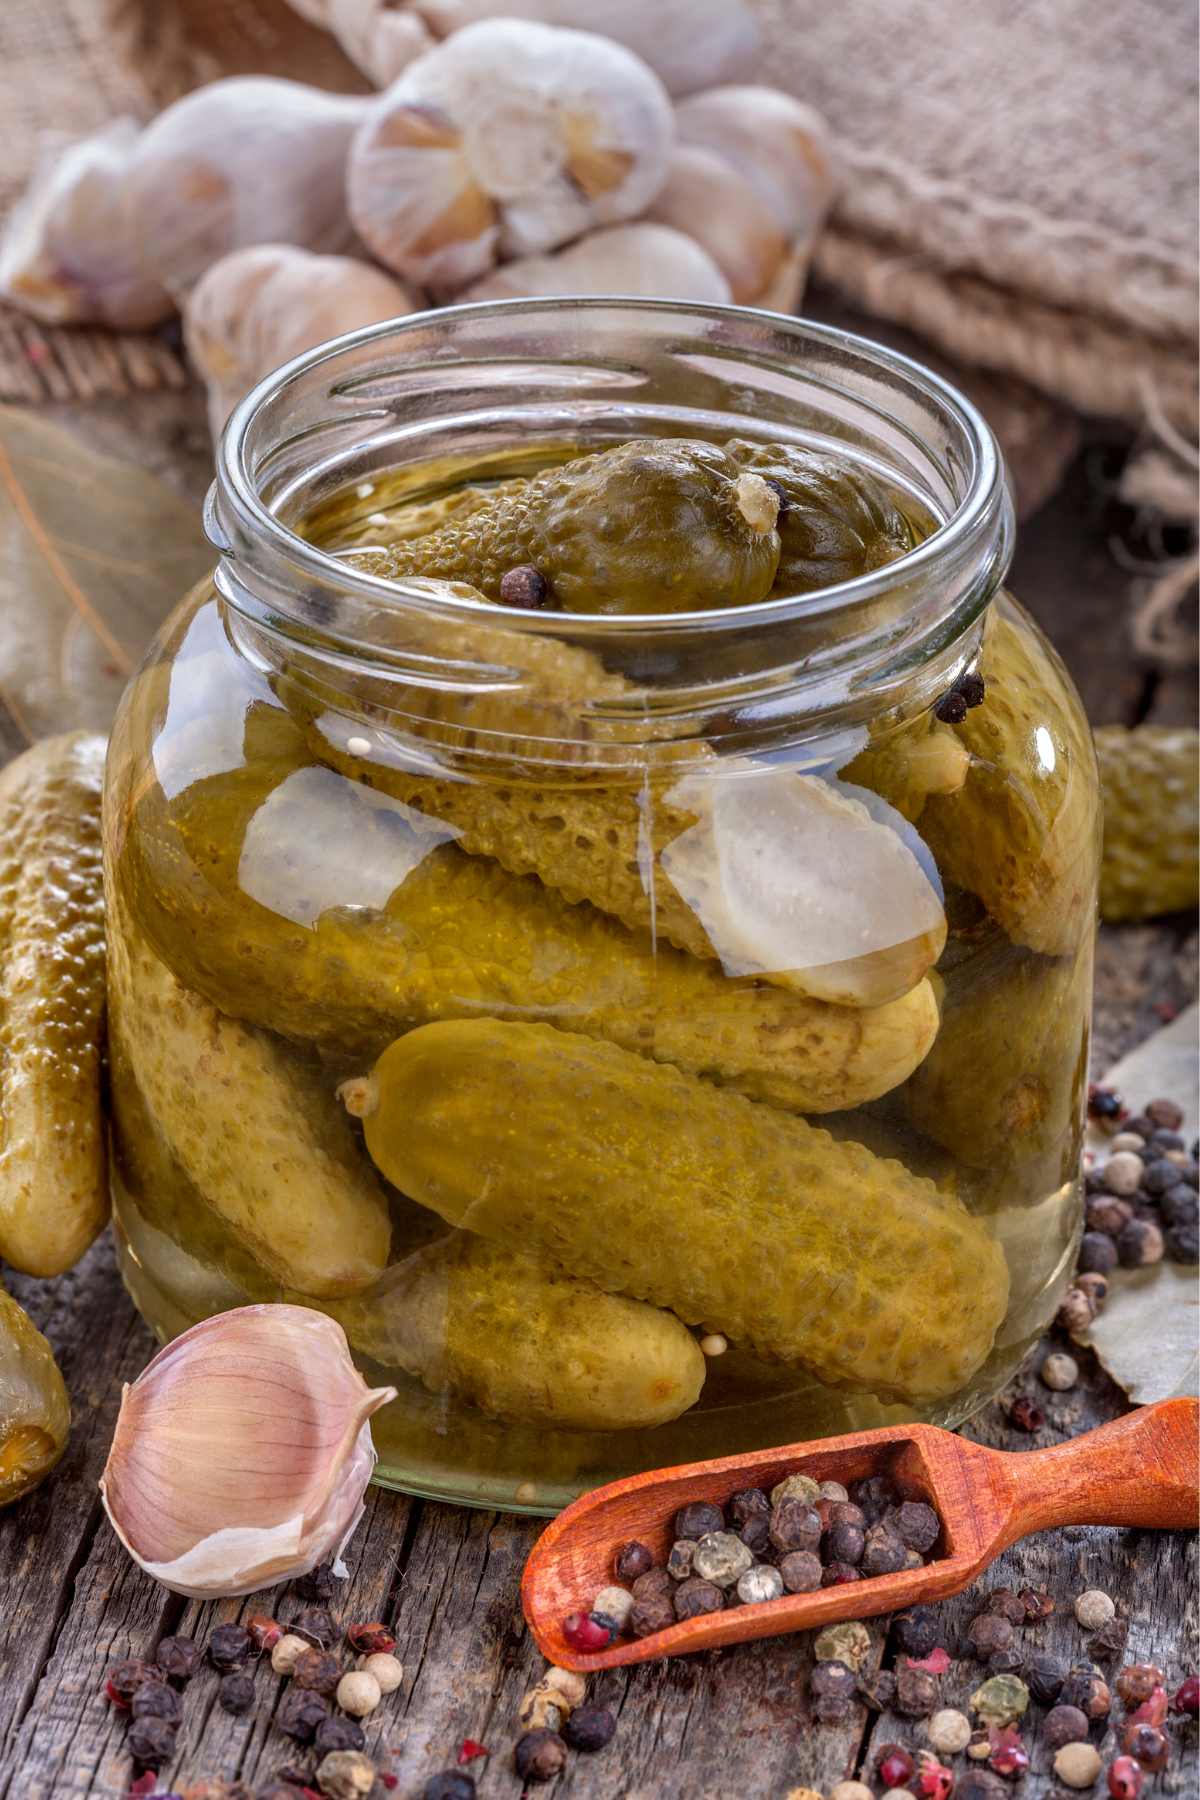 Are pickles keto-friendly? How many carbs are in pickles? If you are following the keto diet, you may wonder, whether you can eat pickles. In this post, we'll explore carbs in different types of pickles and share with you some keto-friendly ways to incorporate pickles into your diet.